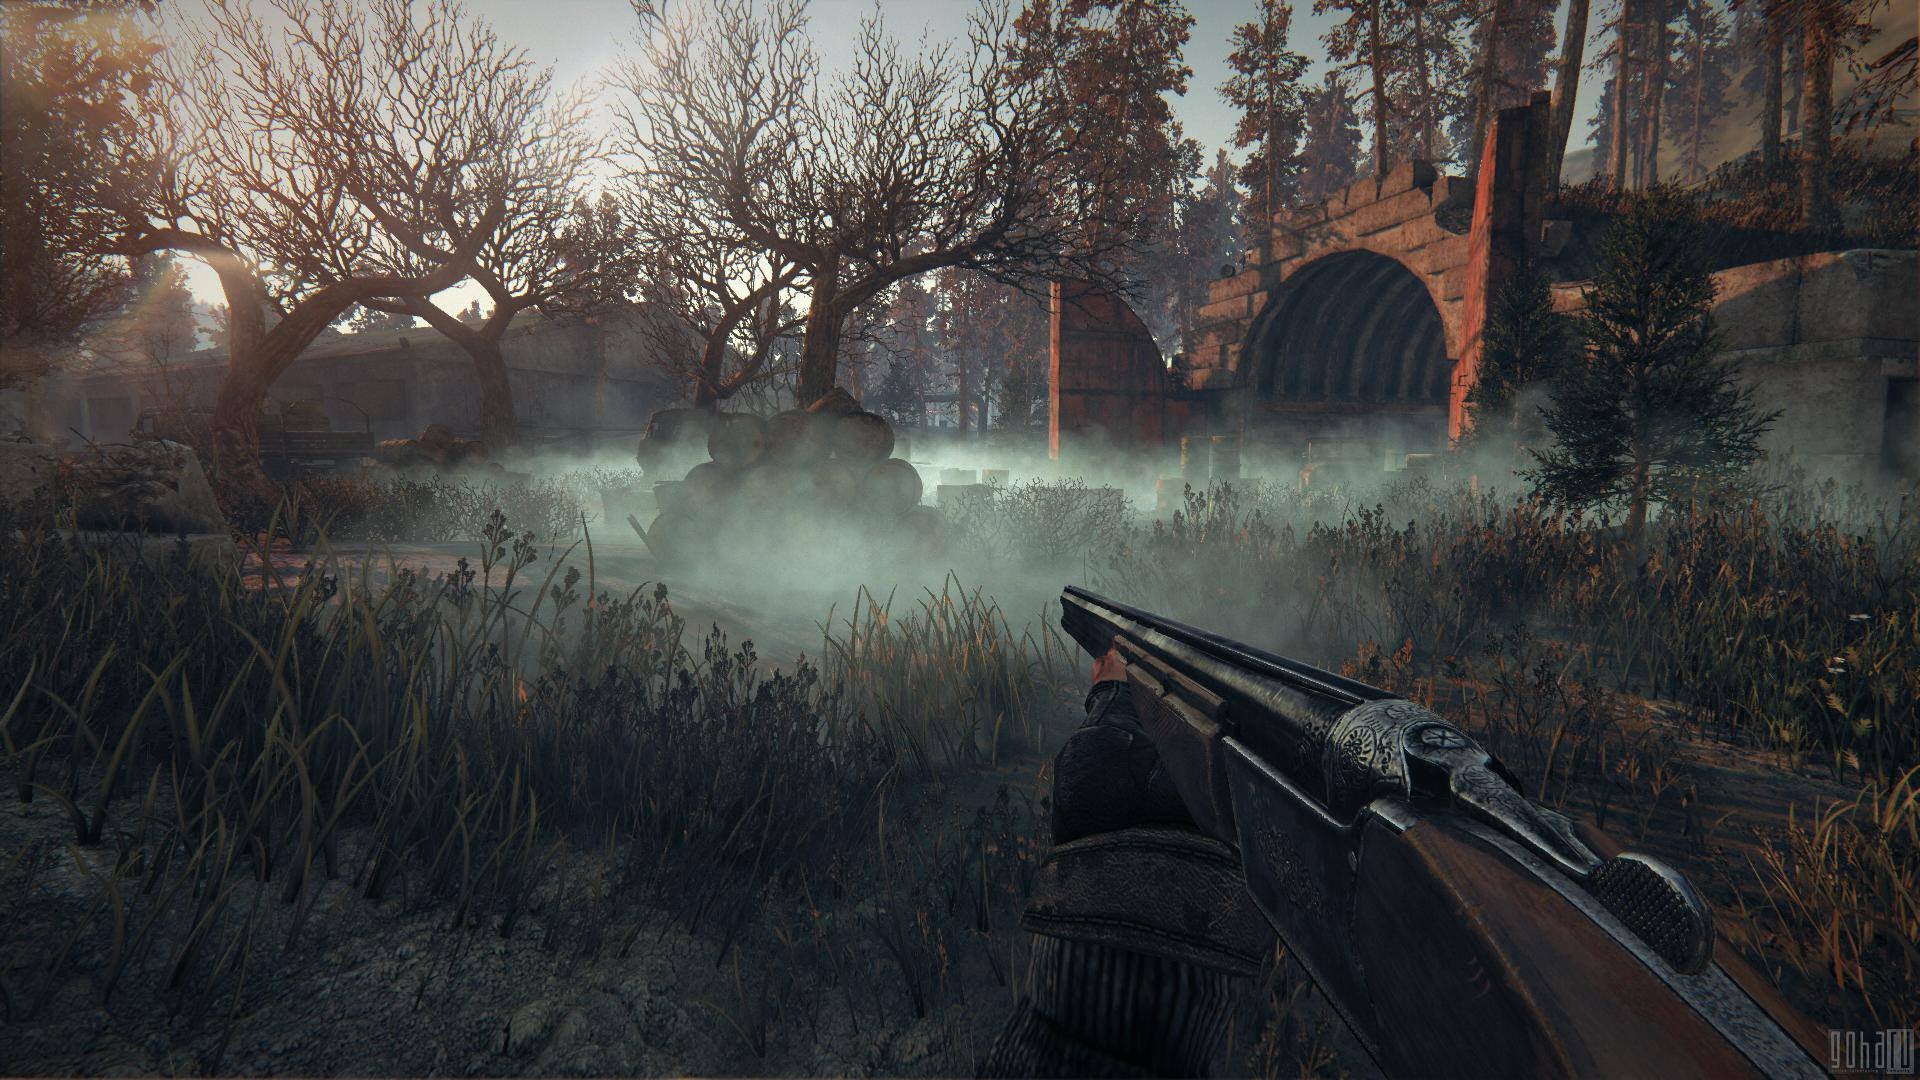 Stalker 2 shows new shots, shows Unreal Engine 4 power